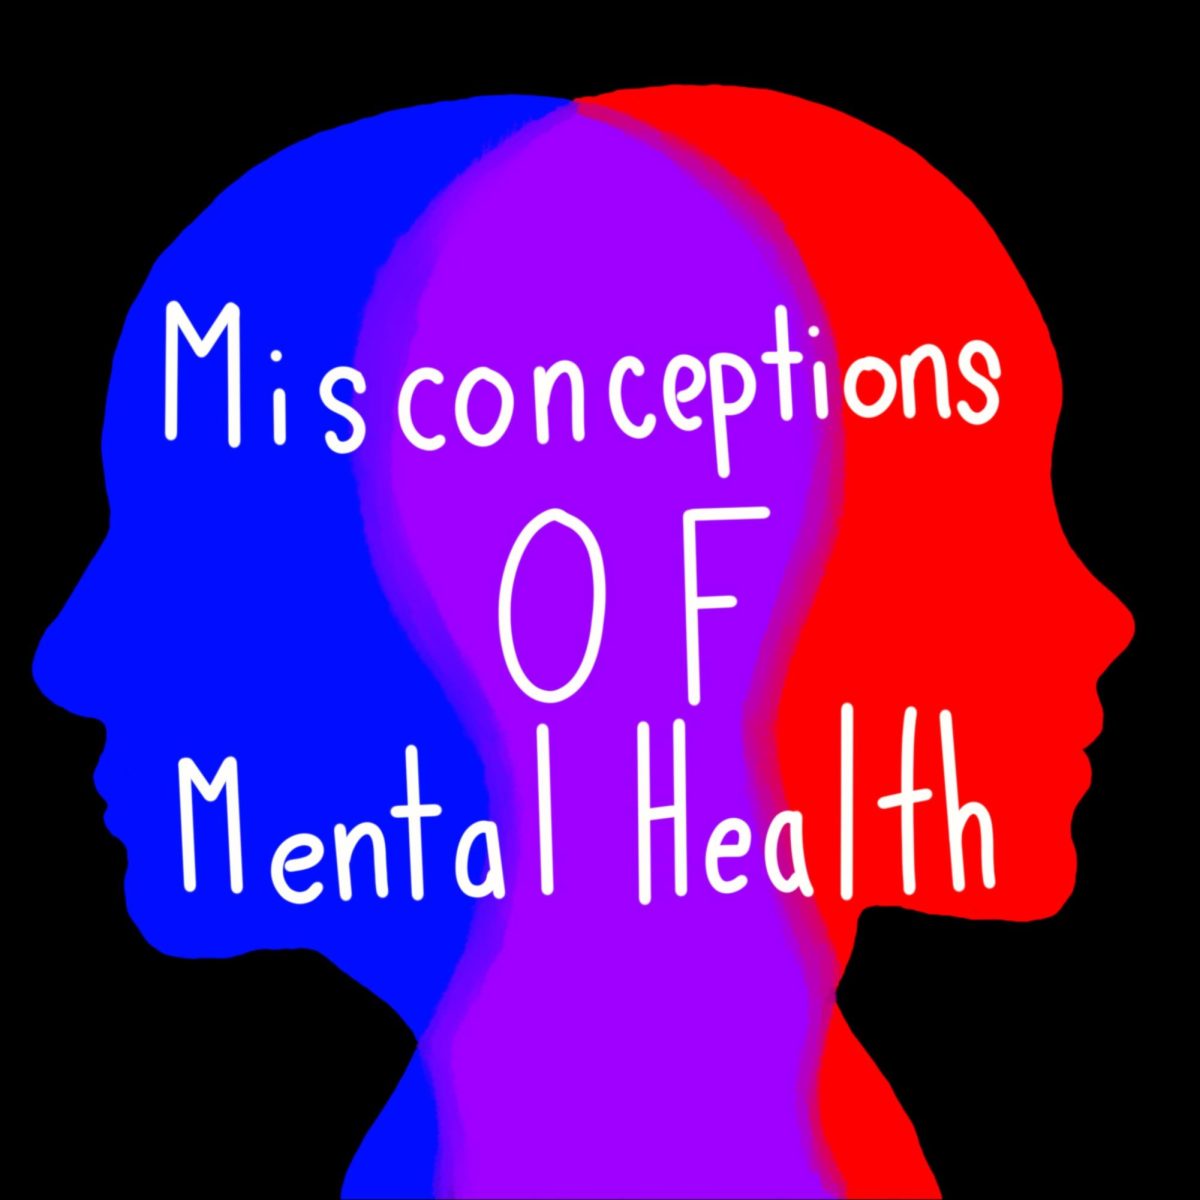 Mental health conditions affect people in many different ways. 